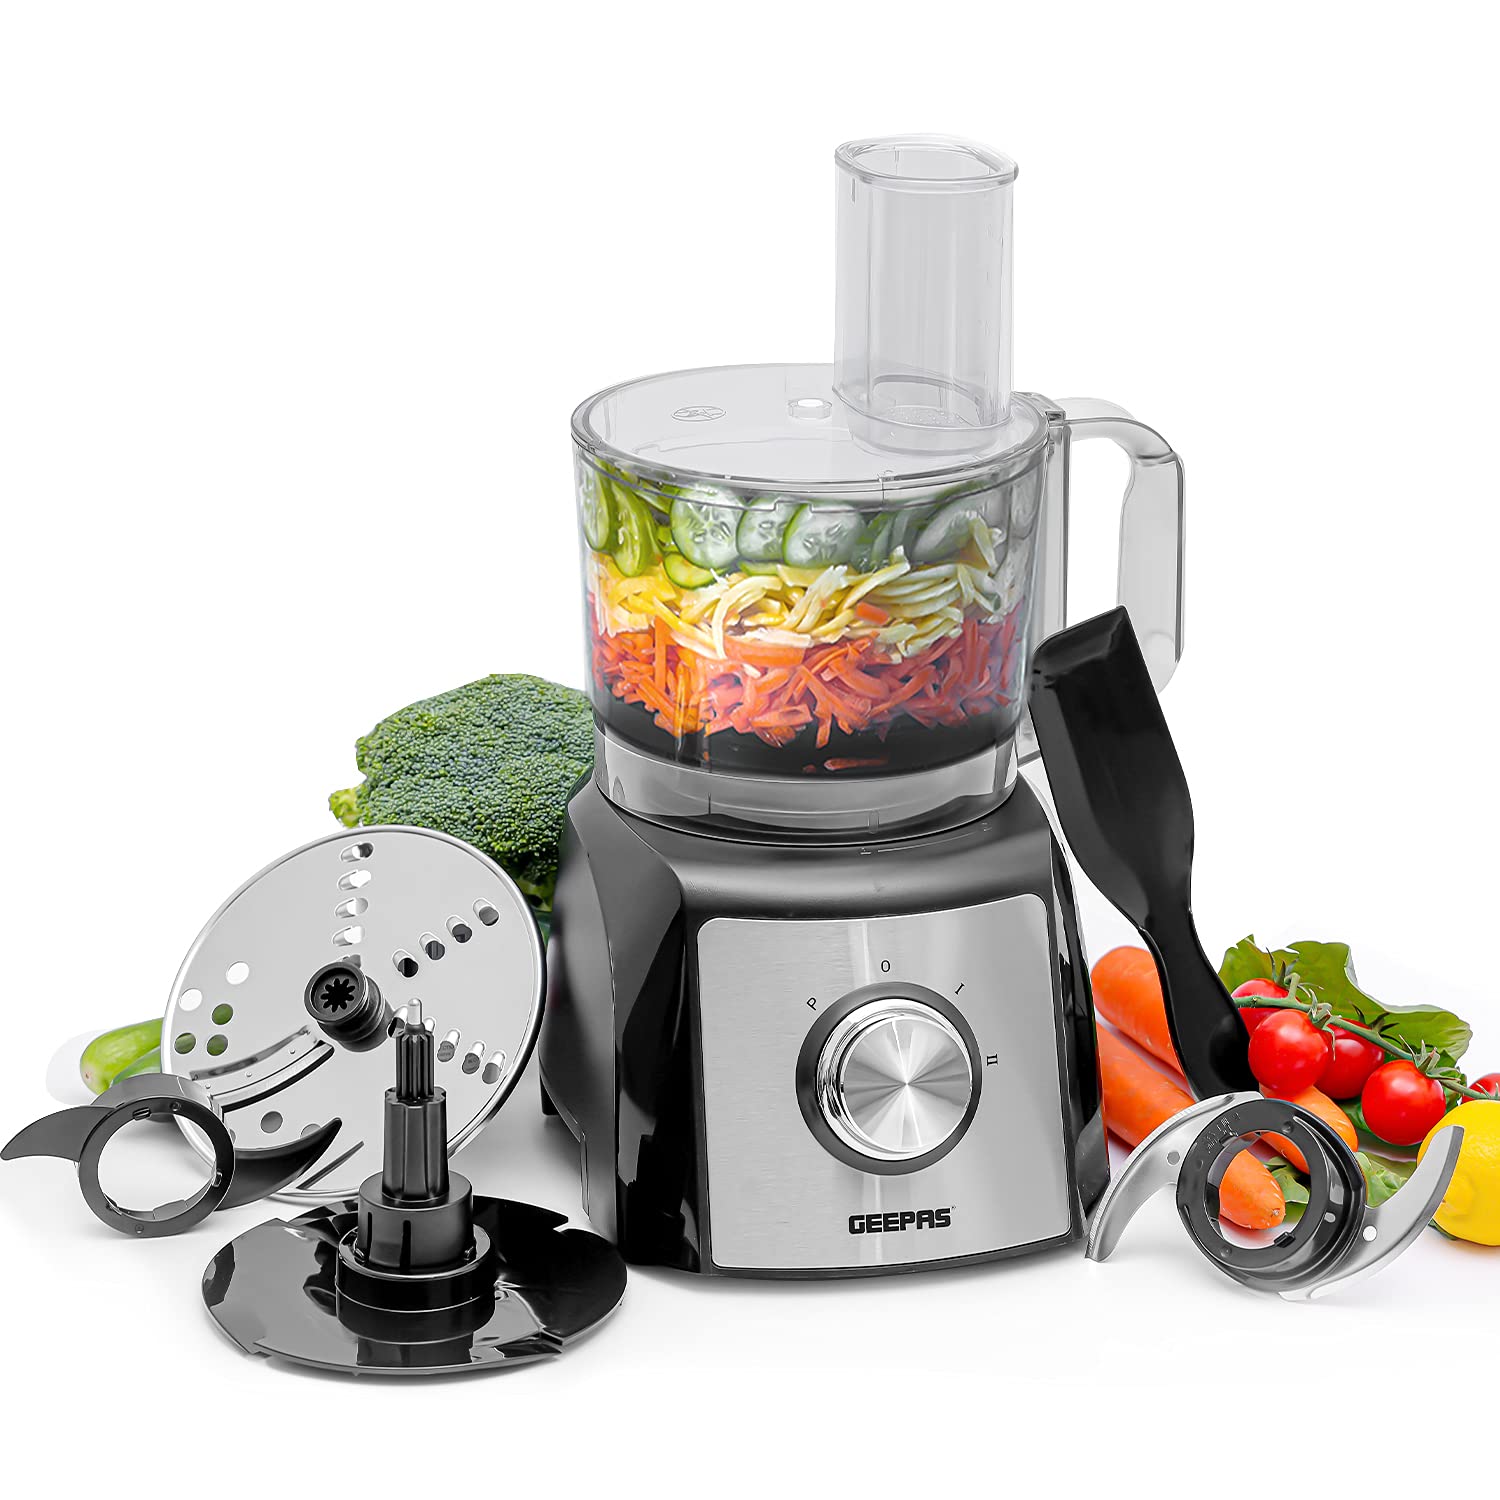 Geepas Geepas gmc42015Uk 1200W Compact Food Processor 1.2L Bowl Capacity Stainless Steel & Dough Blades Included 2 Years Warranty, Black, 1200W 6 In 1